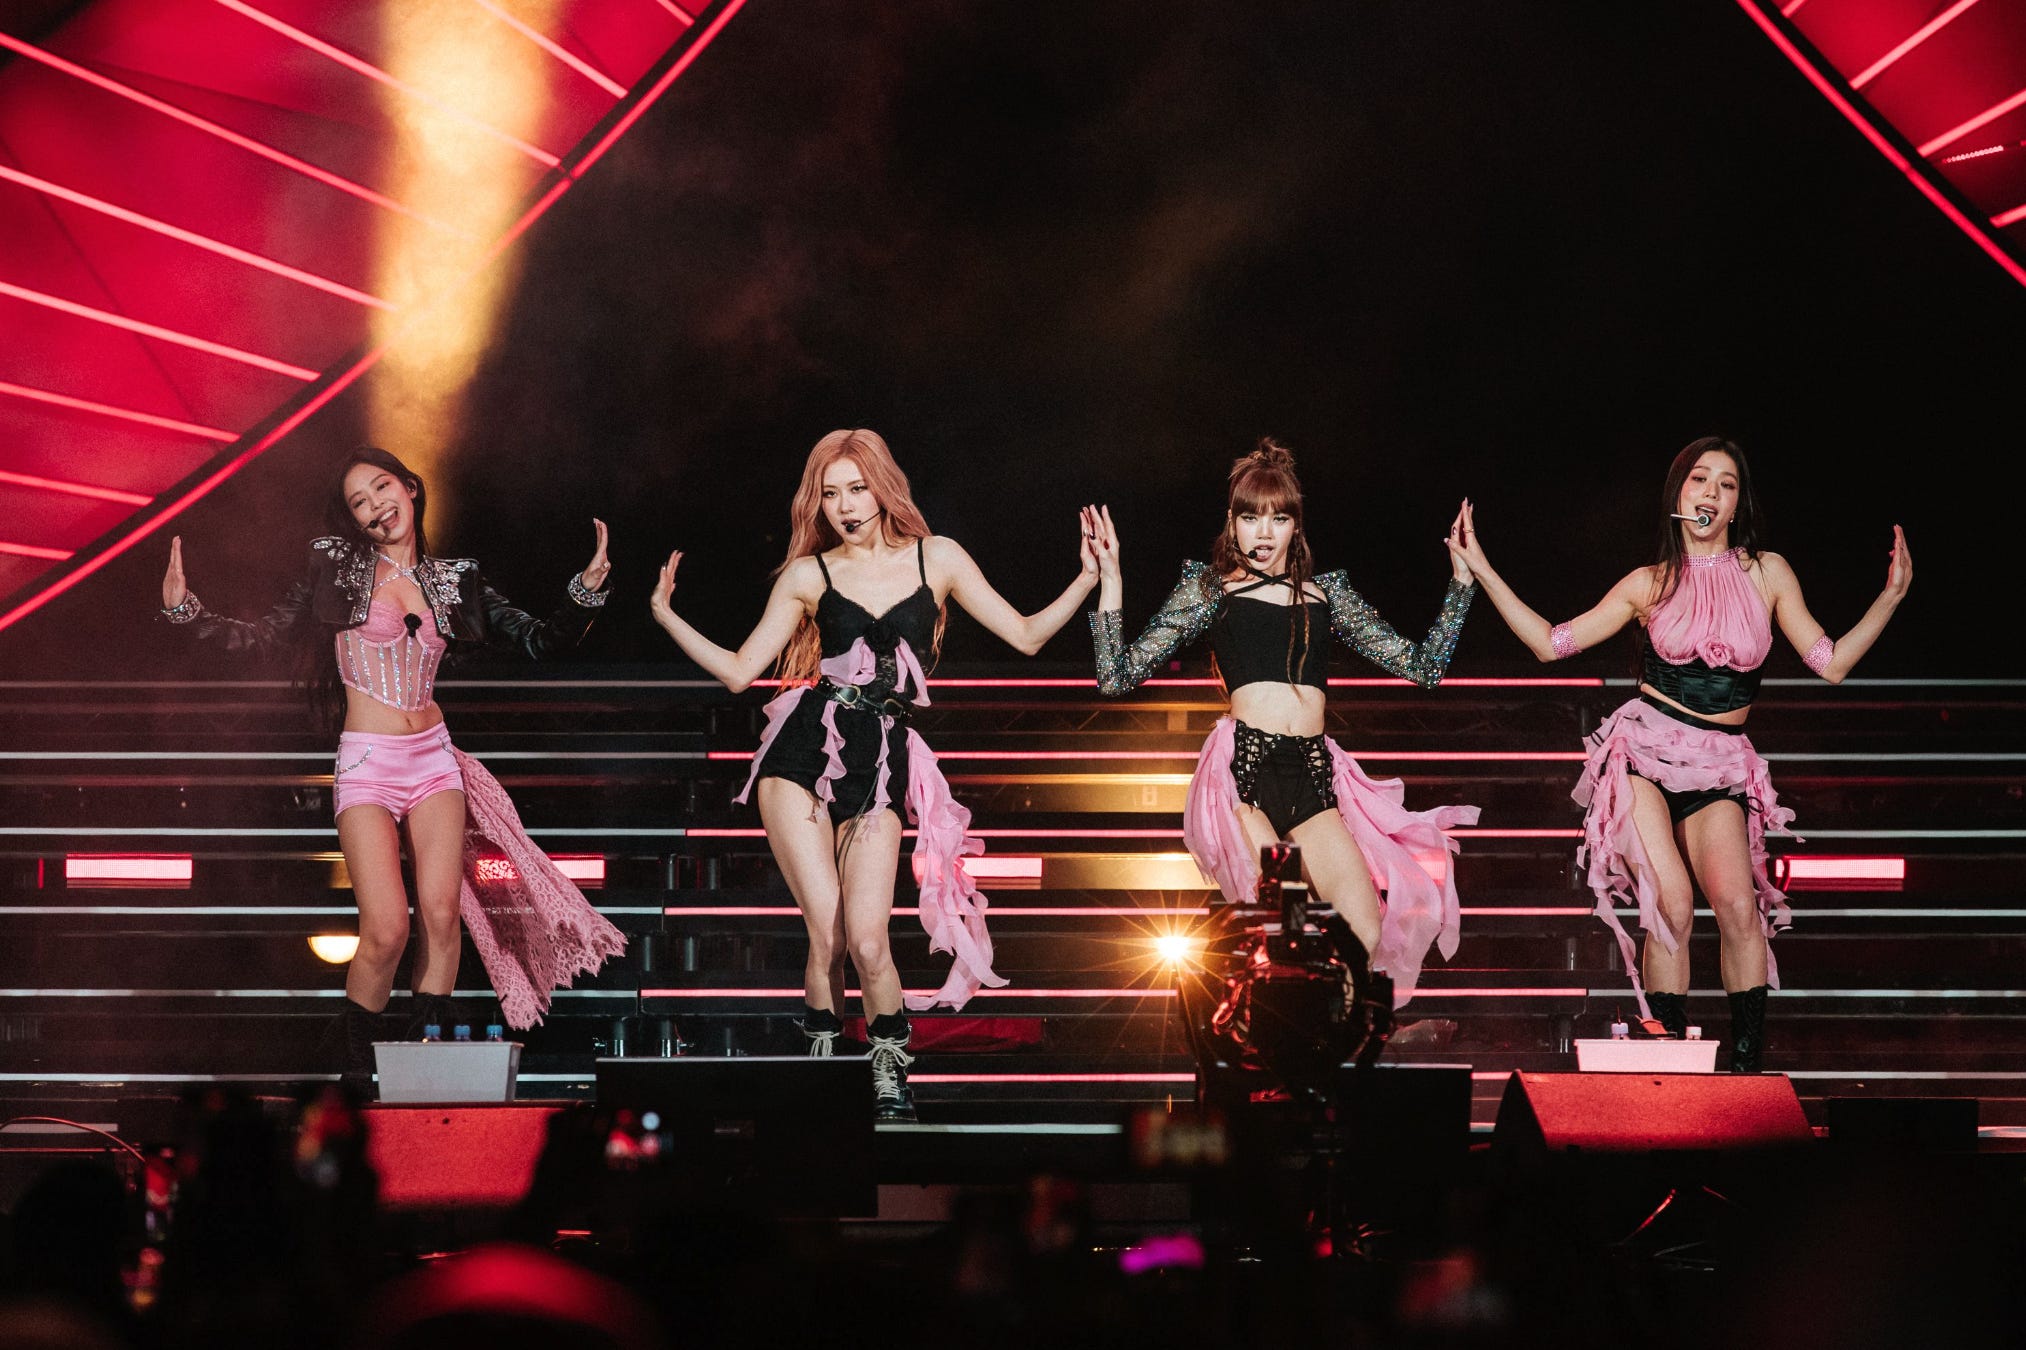 Blackpink performing at coachella. Jennie, Rosé, Lisa and Jisoo pose on stage with hands raised in pink, black, and silver looks